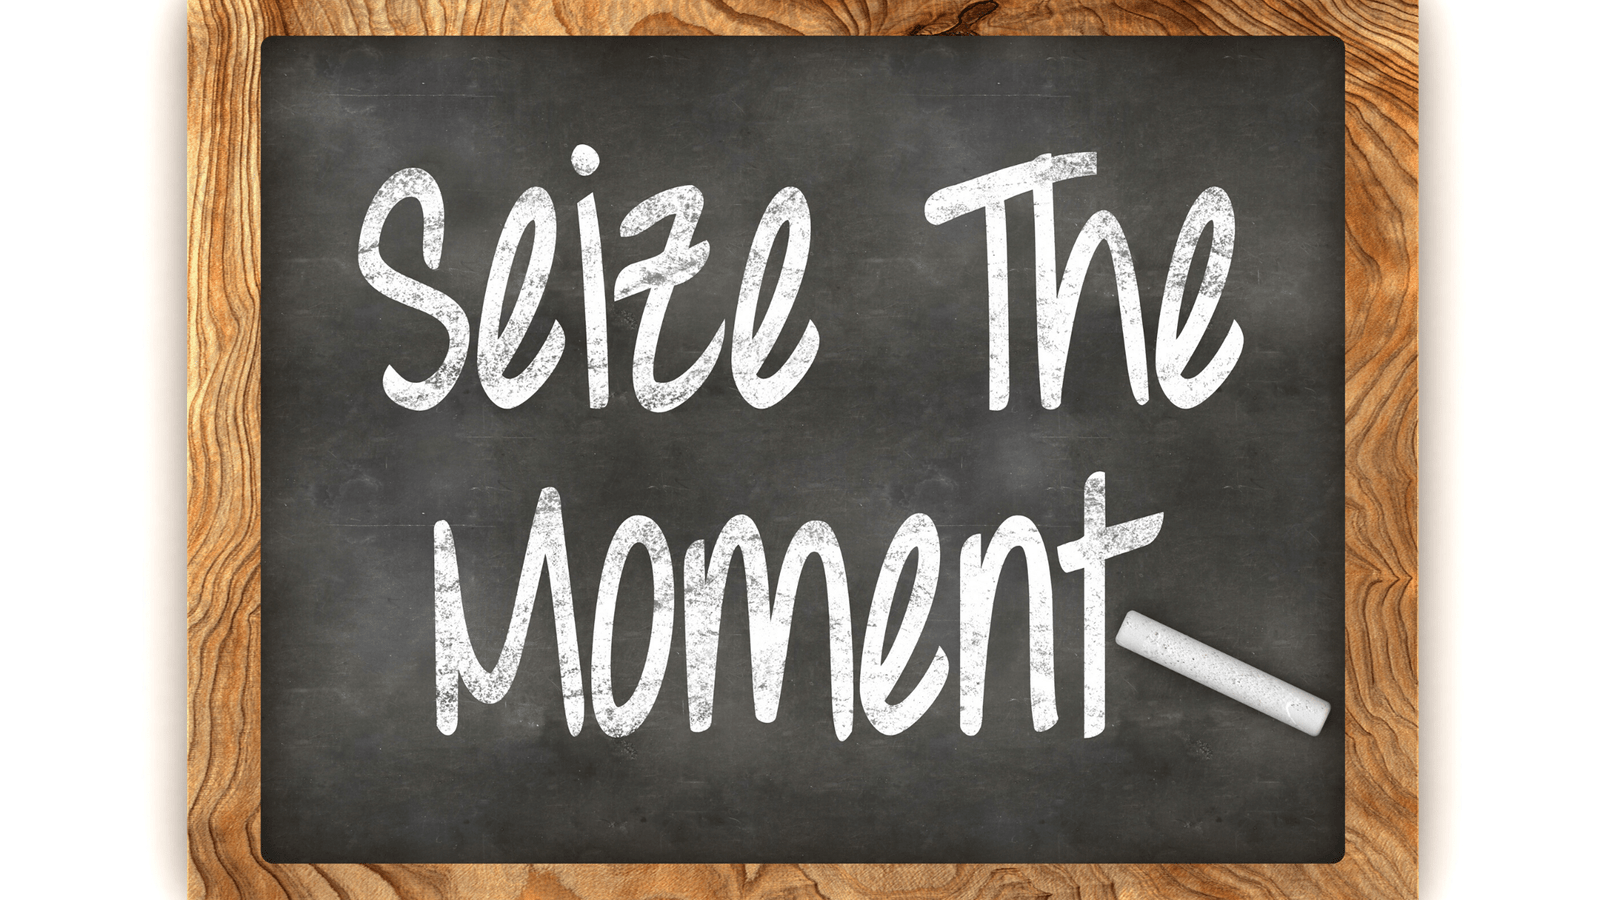 Learn to Seize the Moment and live life fullest!